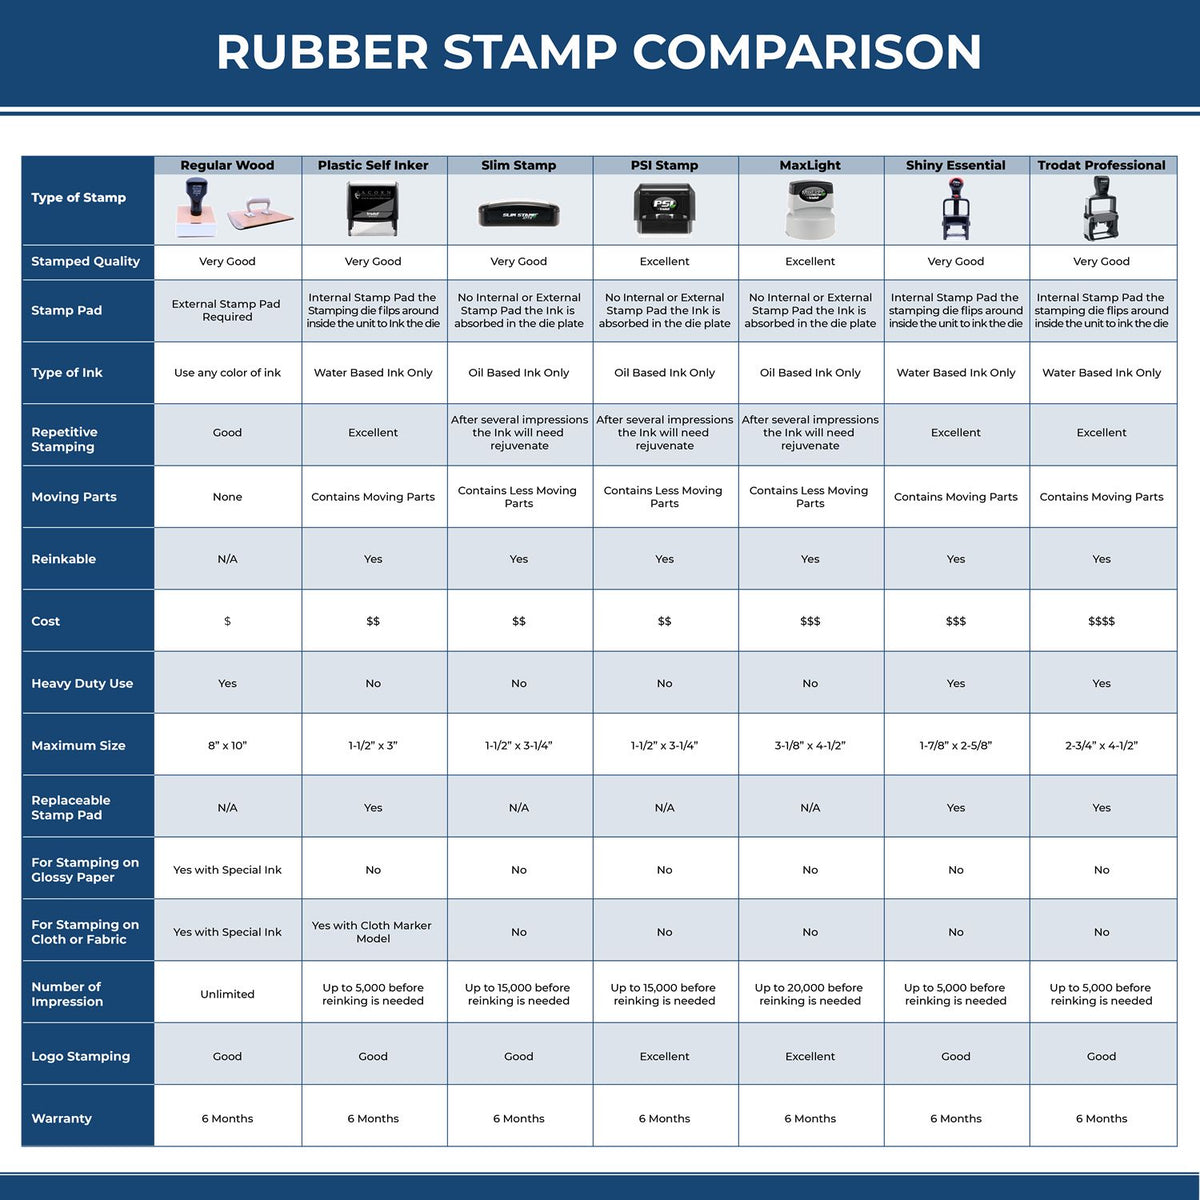 Large For Official Use Only Rubber Stamp 4928R Rubber Stamp Comparison